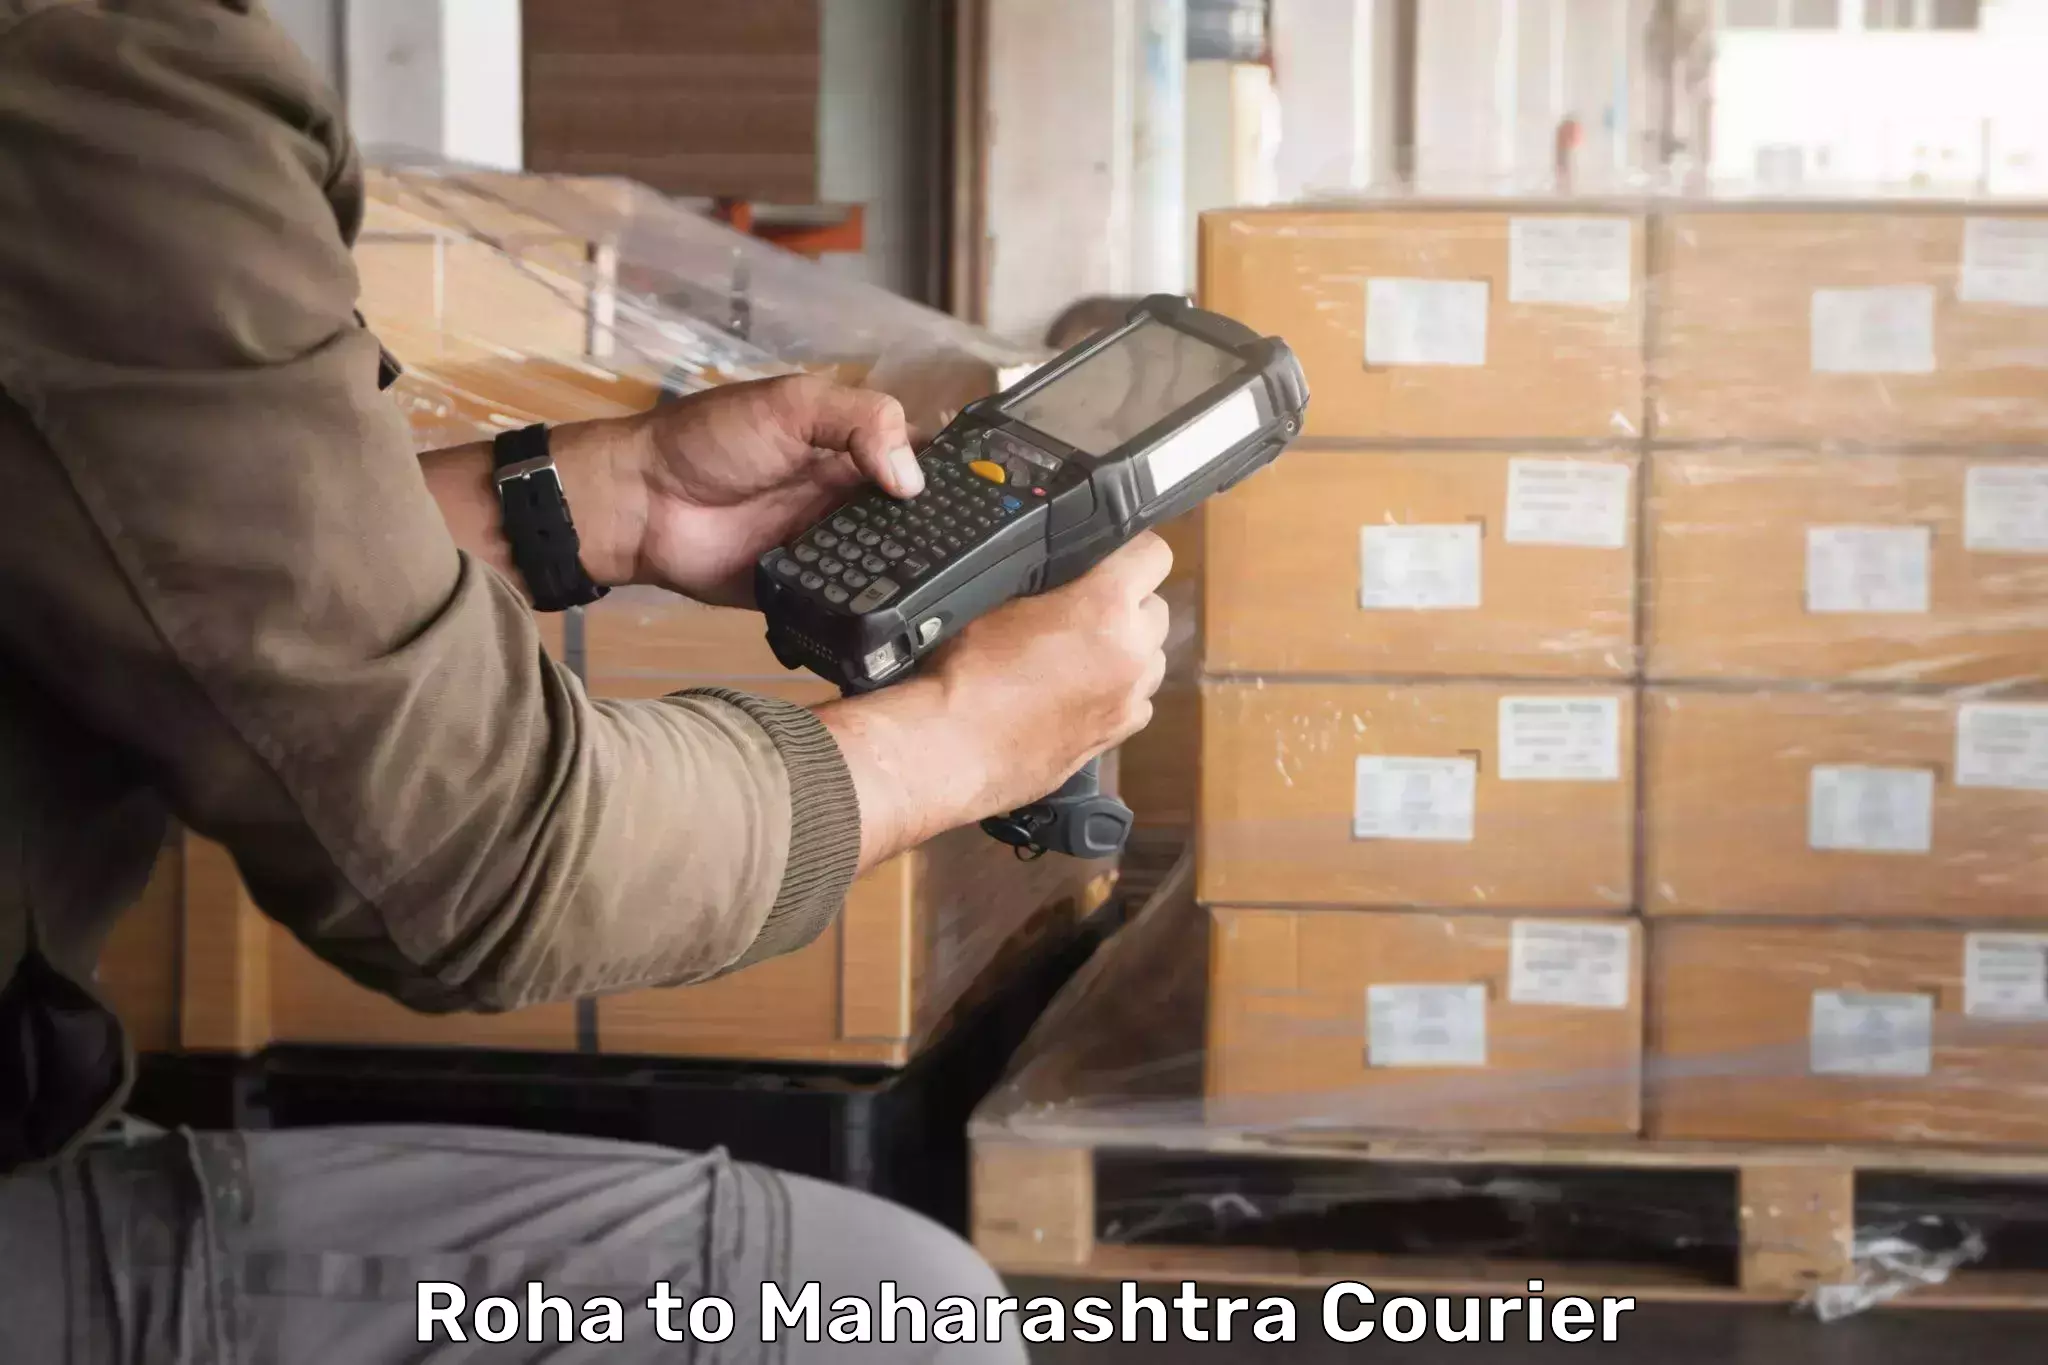 Flexible delivery schedules Roha to Maharashtra